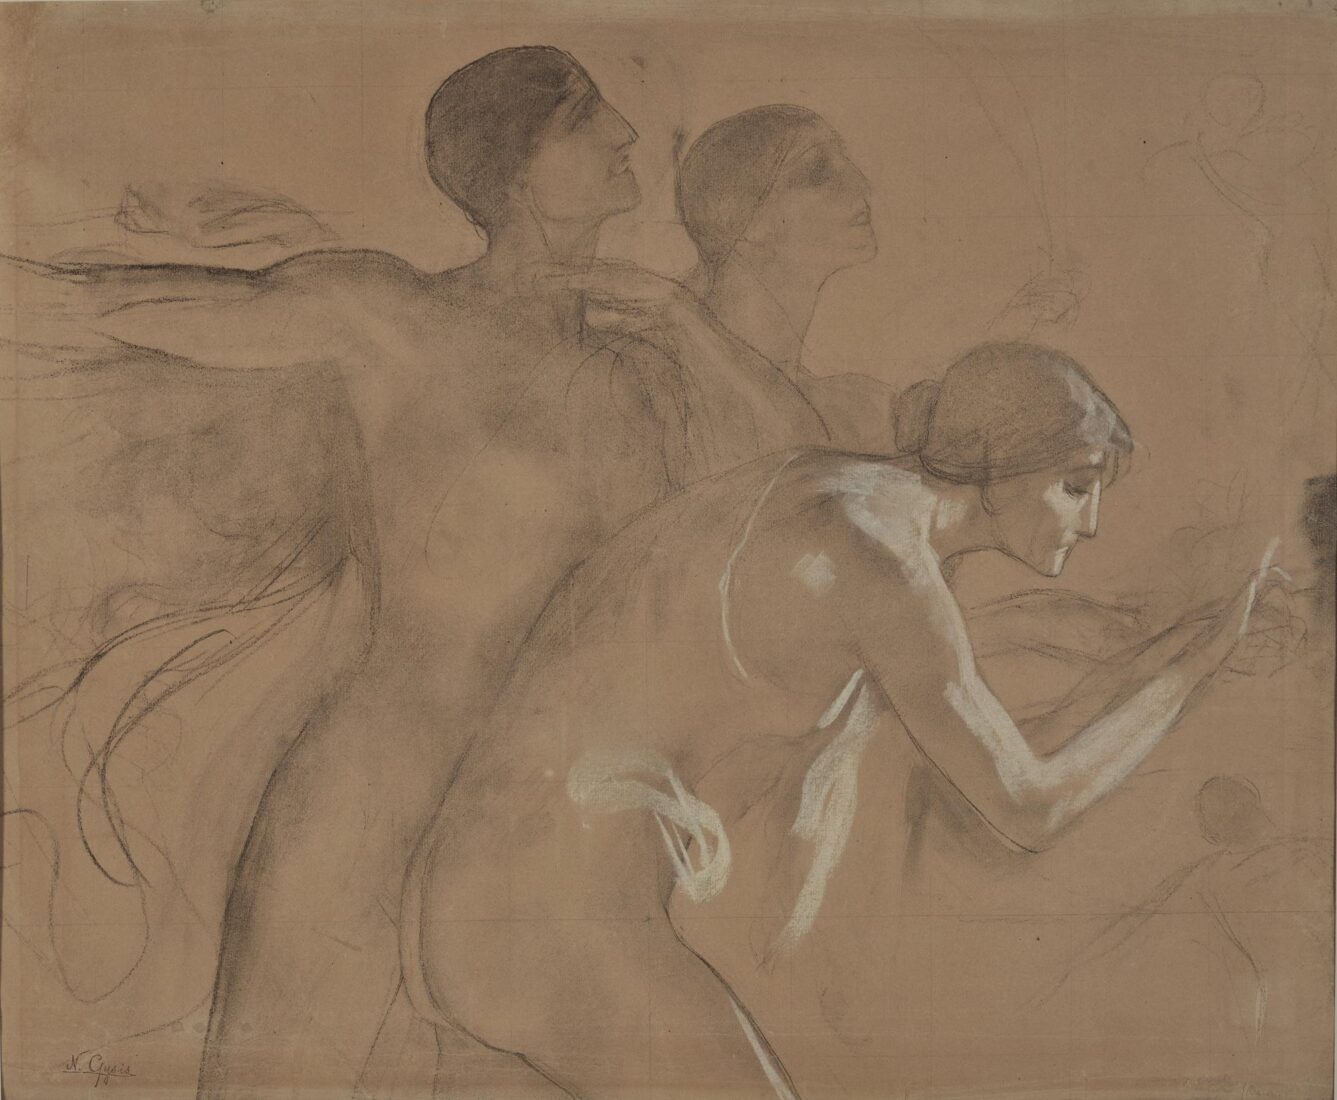 Study for the Allegorical Figures following the Chariot (“Industry”, “Trade”, the “Crafts”)